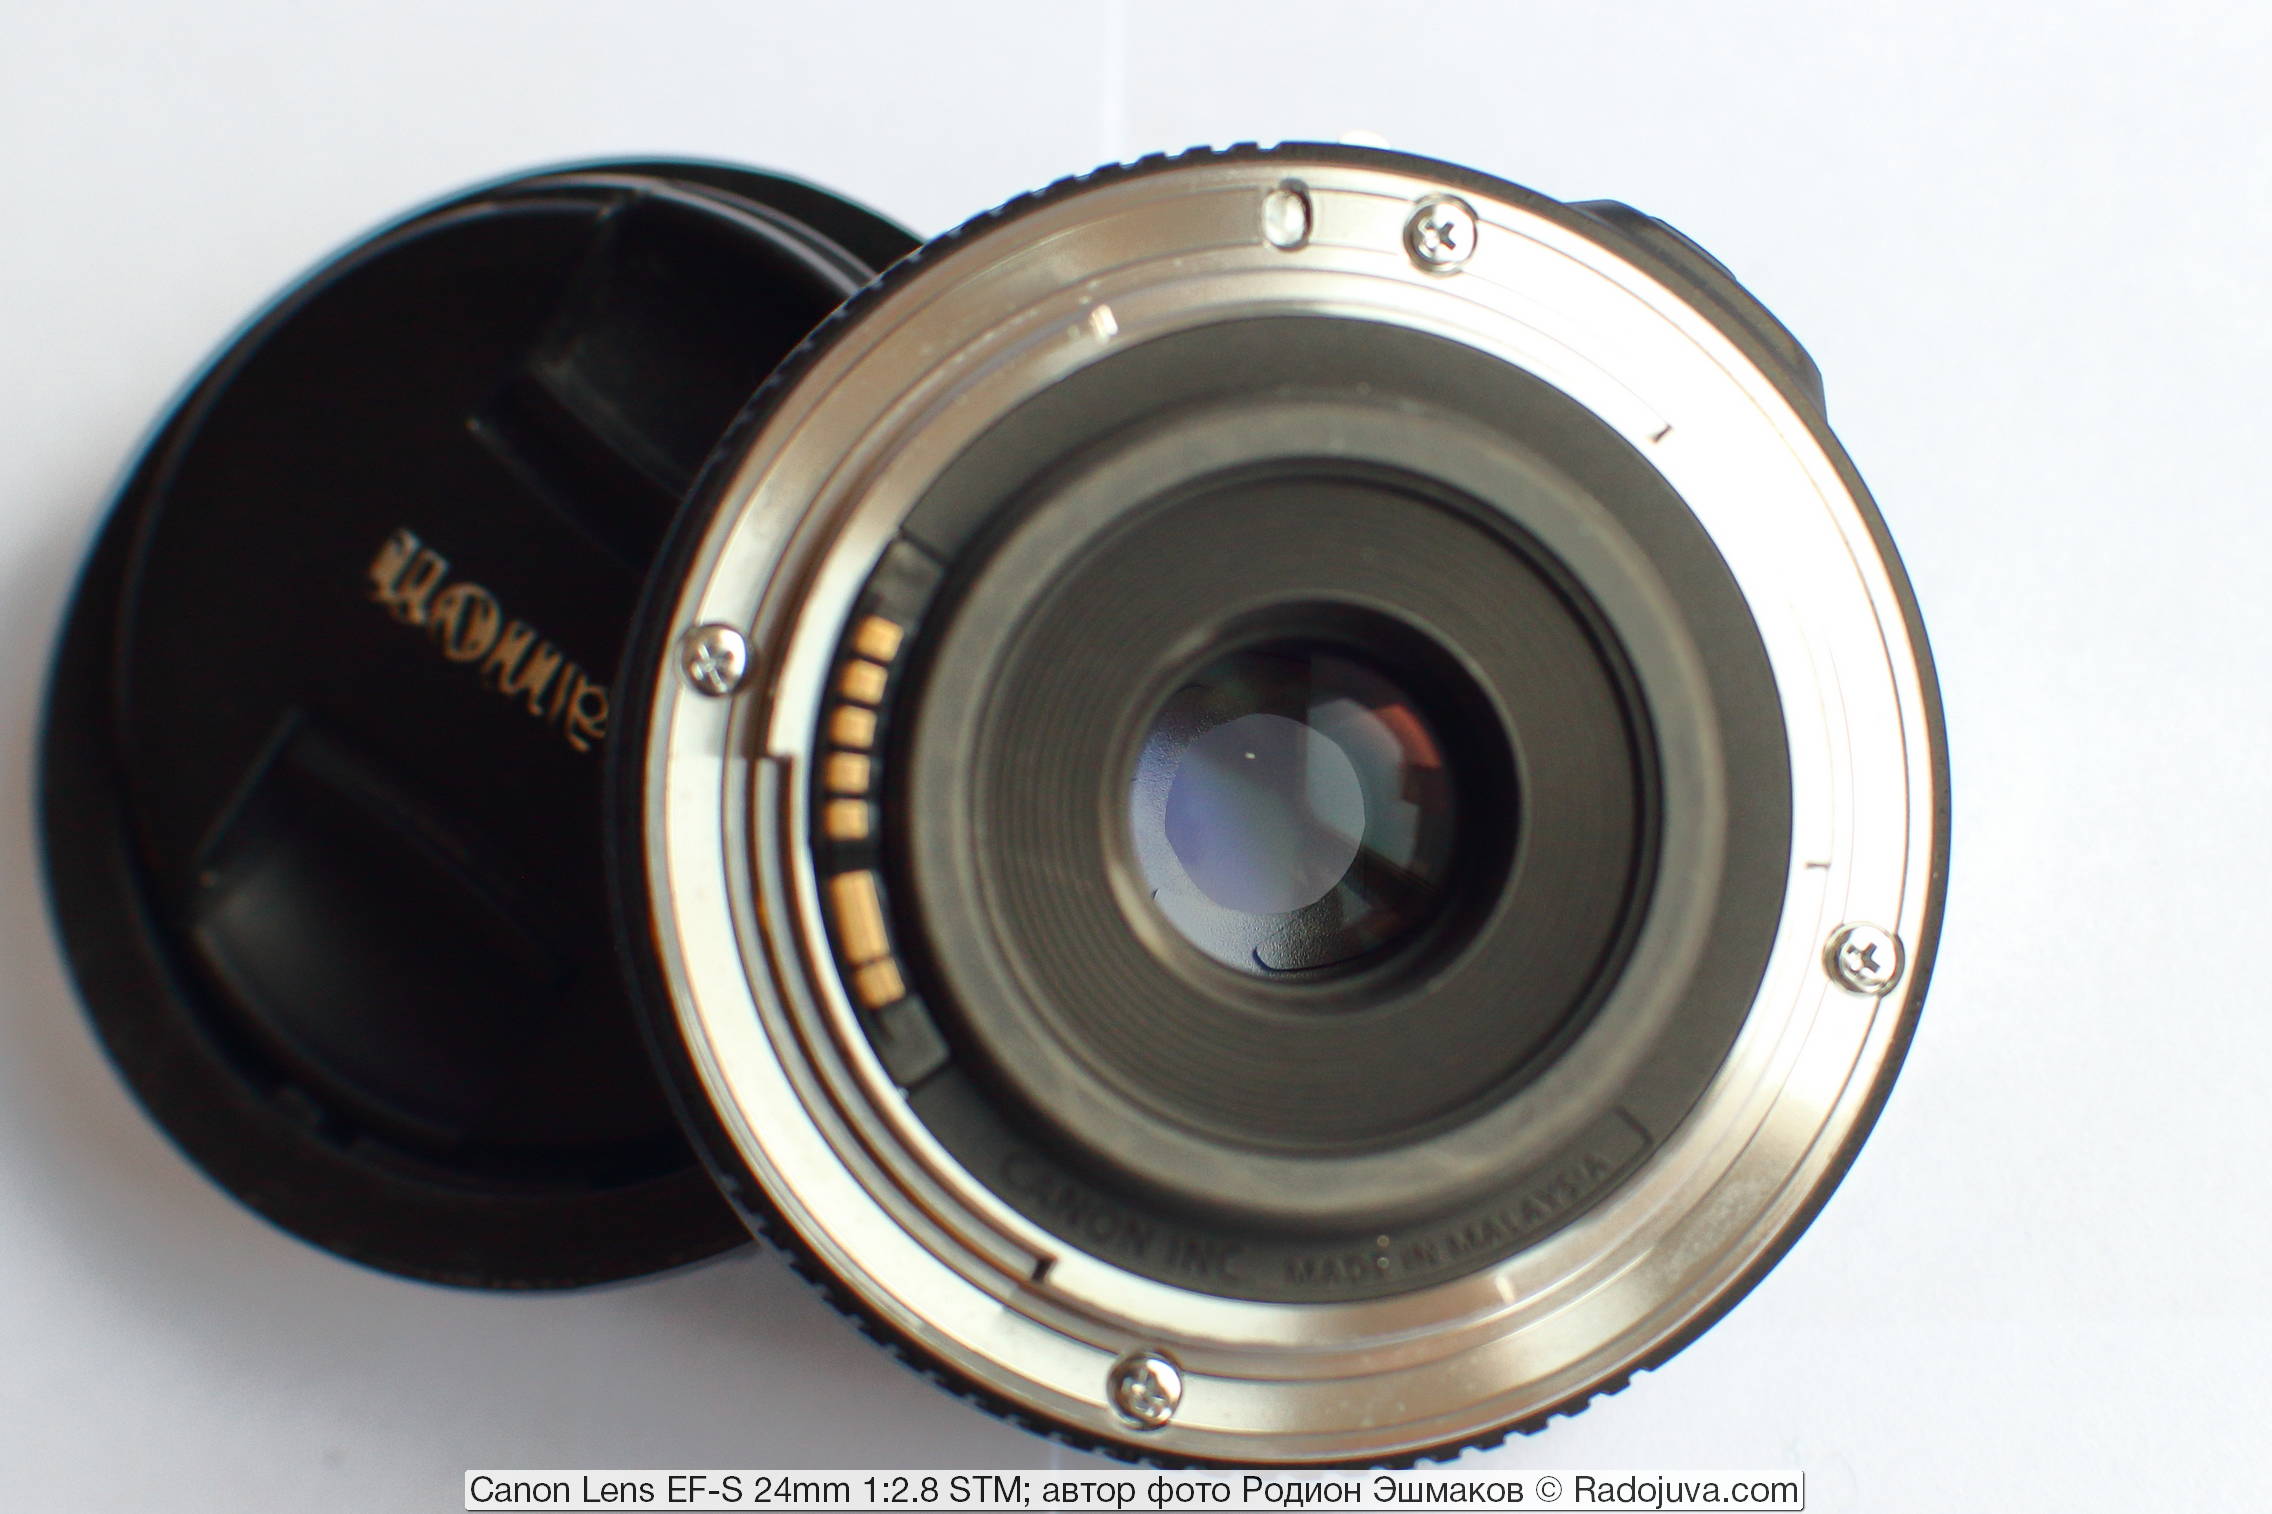 View of the lens diaphragm through the rear lens